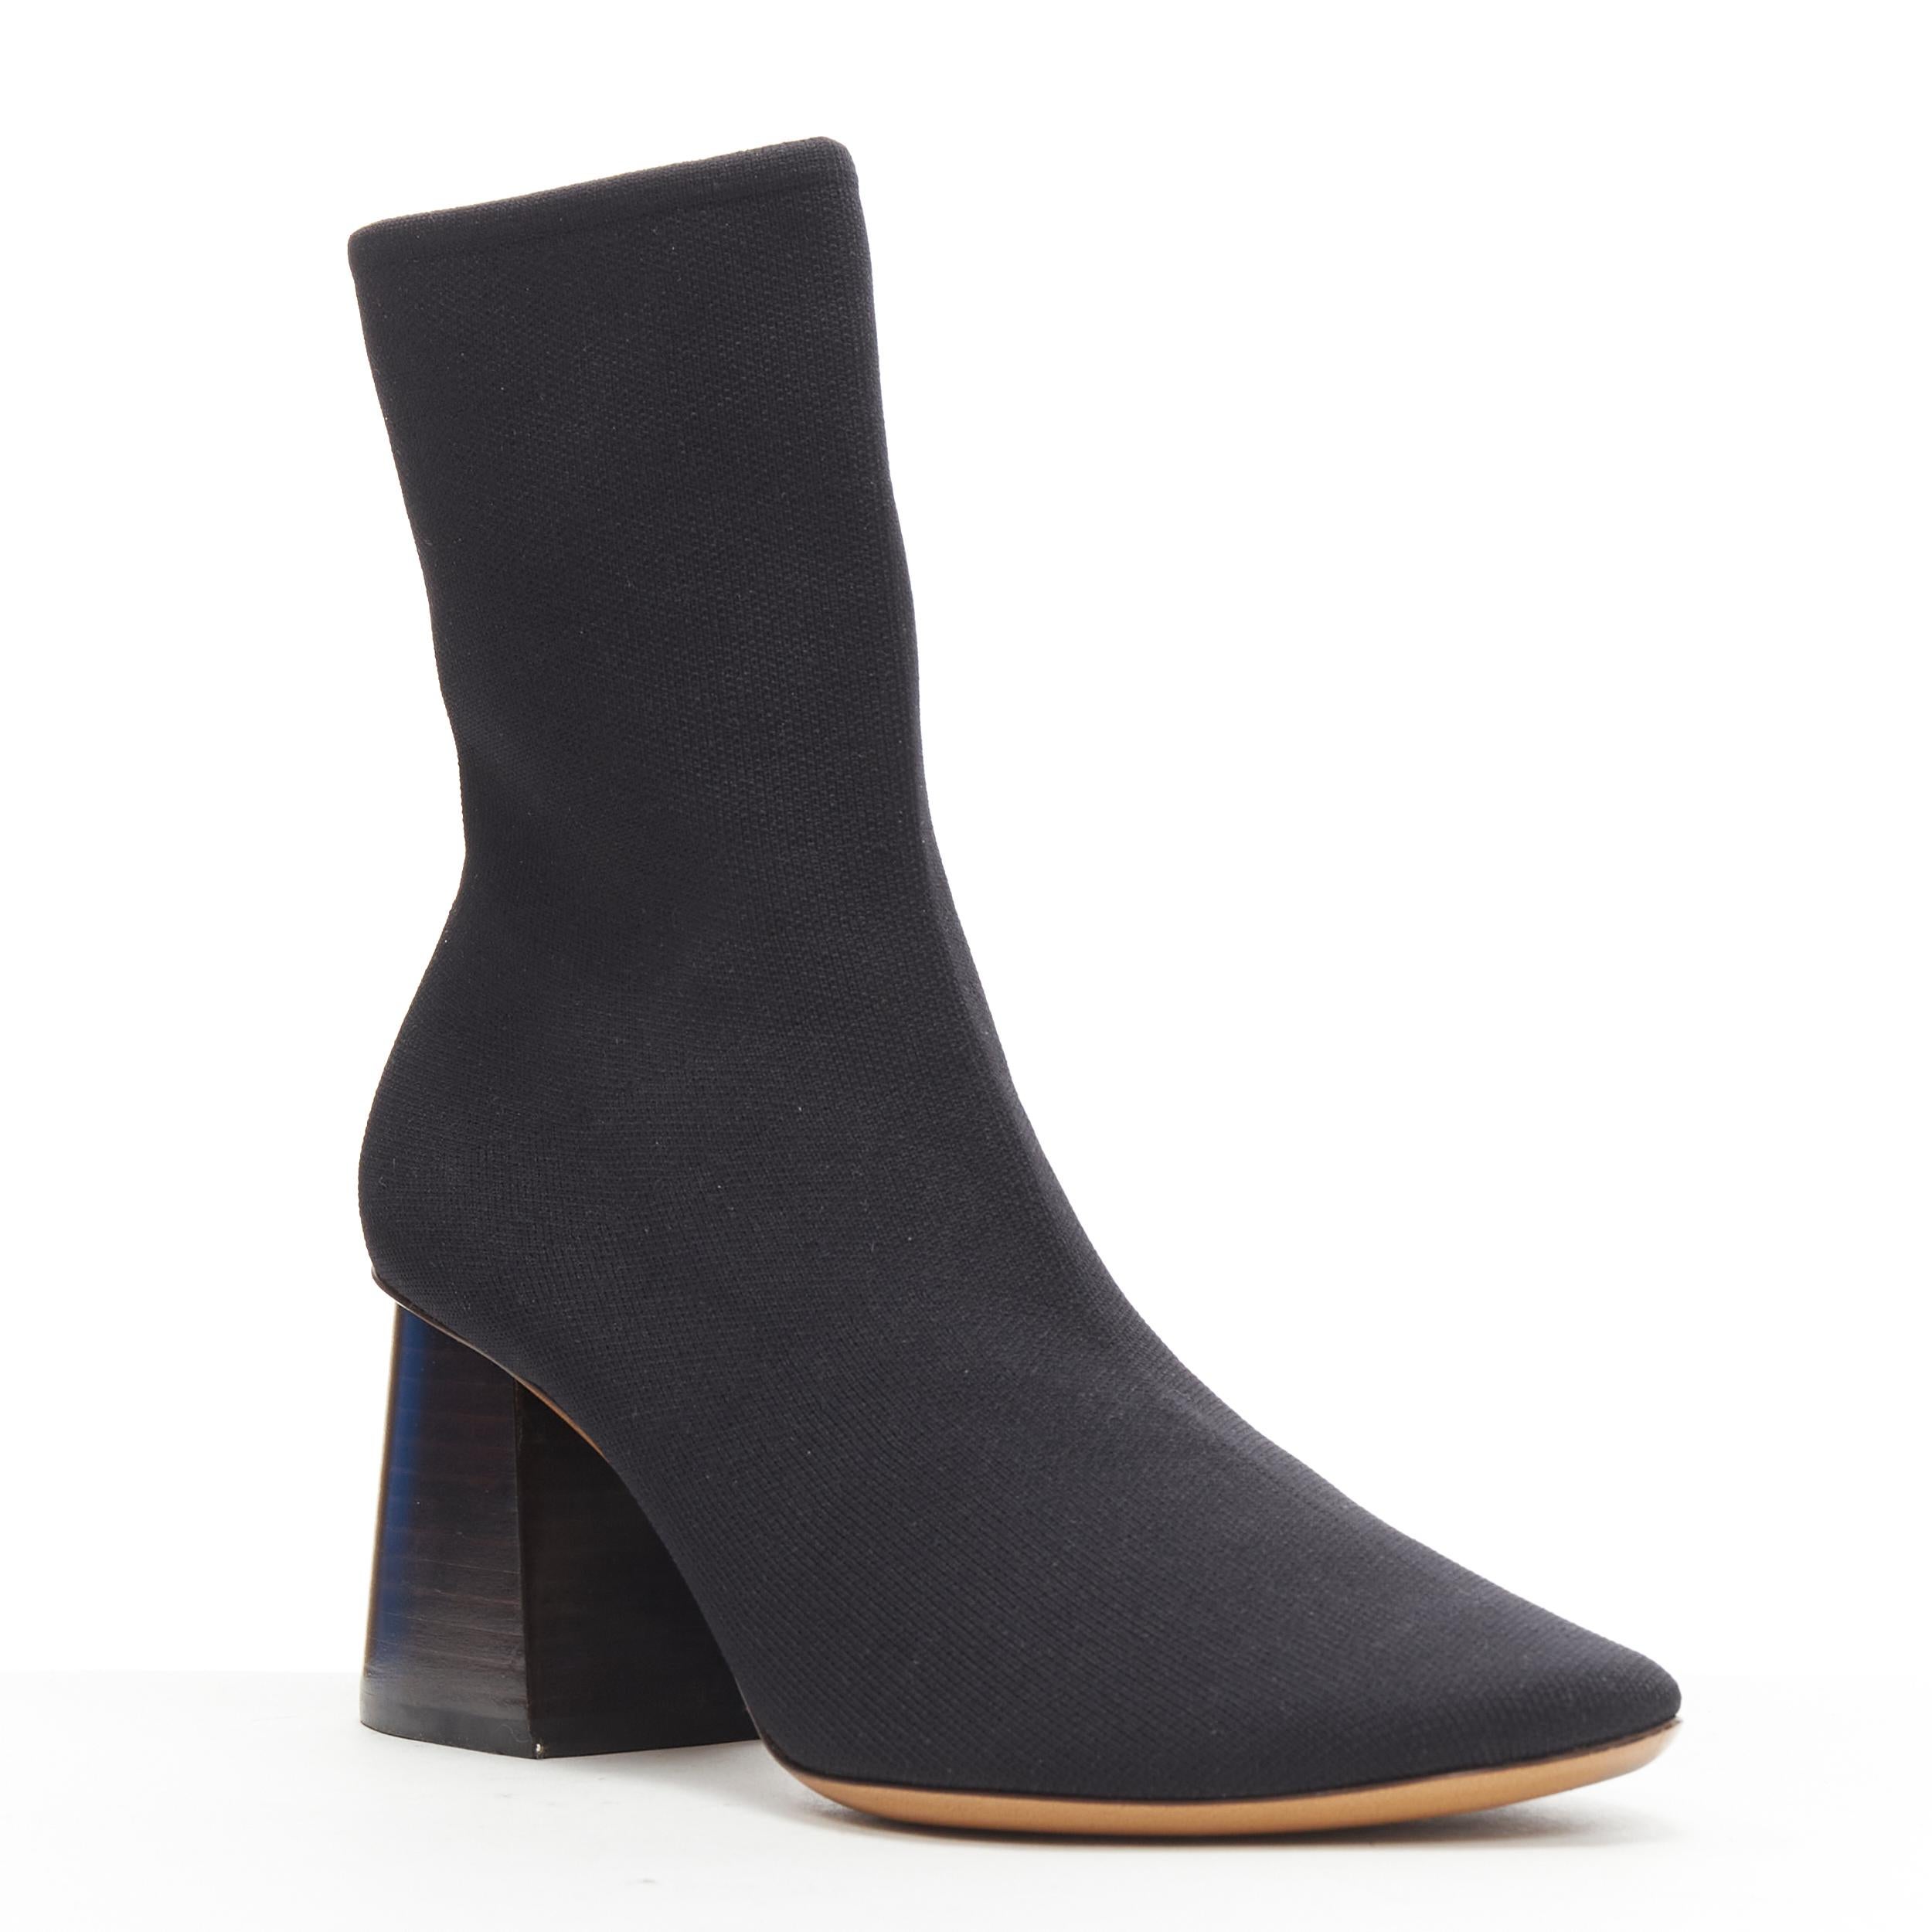 OLD CELINE PHOEBE PHILO black sock knit round toe wooden block heel bootie EU37 Reference: TGAS/B01060 
Brand: Celine 
Designer: Phoebe Philo 
Material: Fabric 
Color: Black 
Pattern: Solid 
Extra Detail: Sock knit upper. Round toe. Stretch fit.